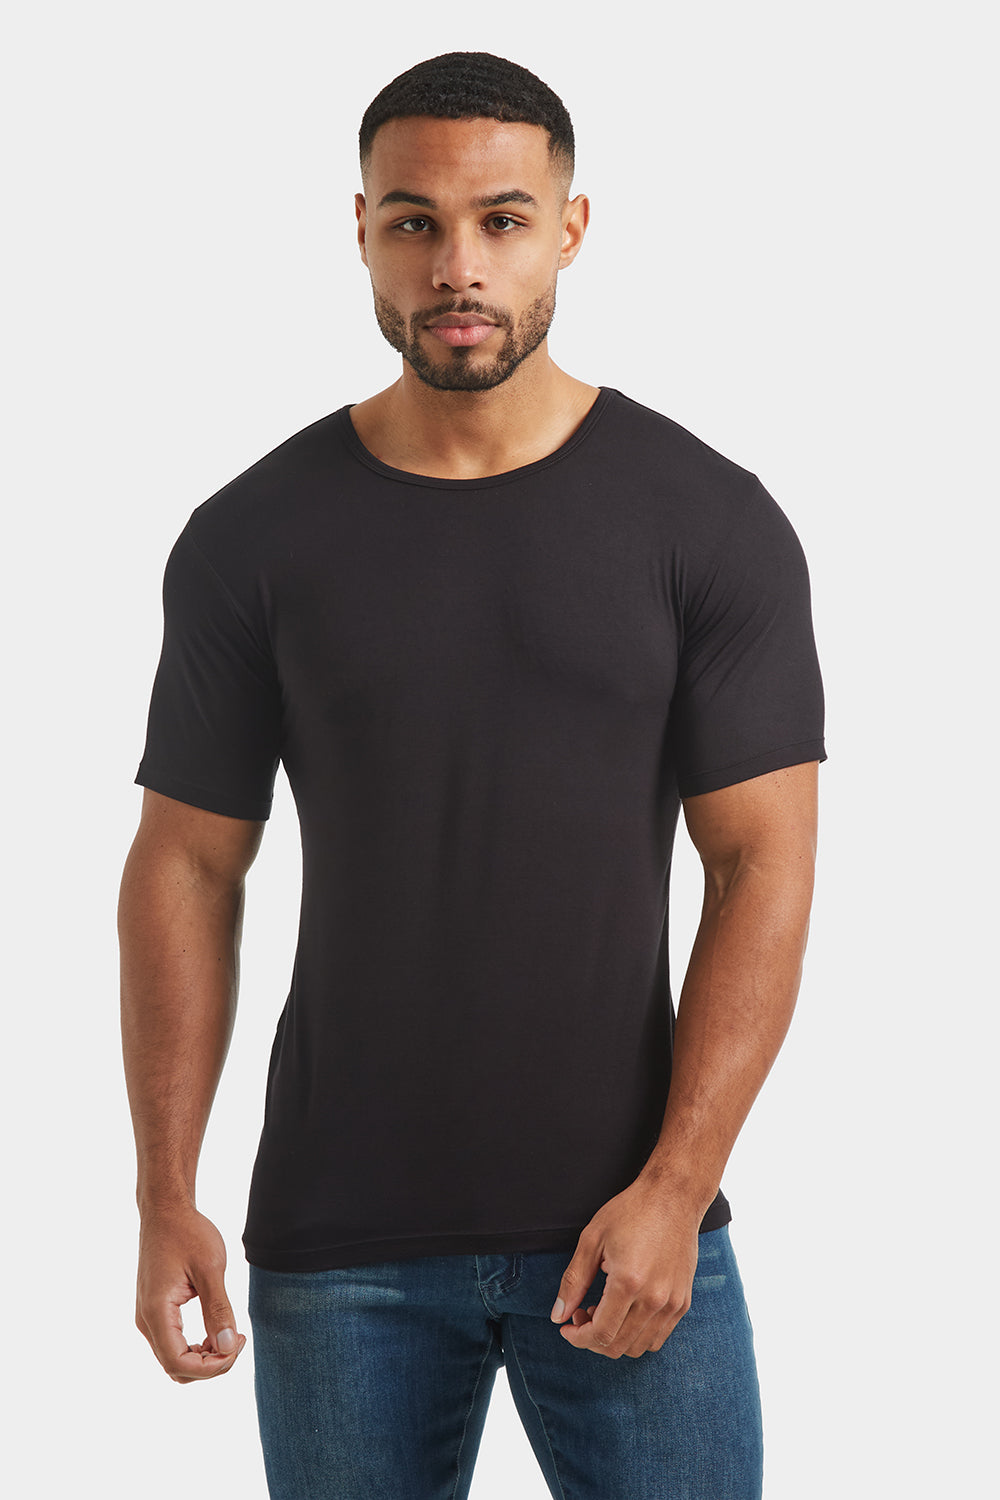 Fashion Fit T-Shirt in Black